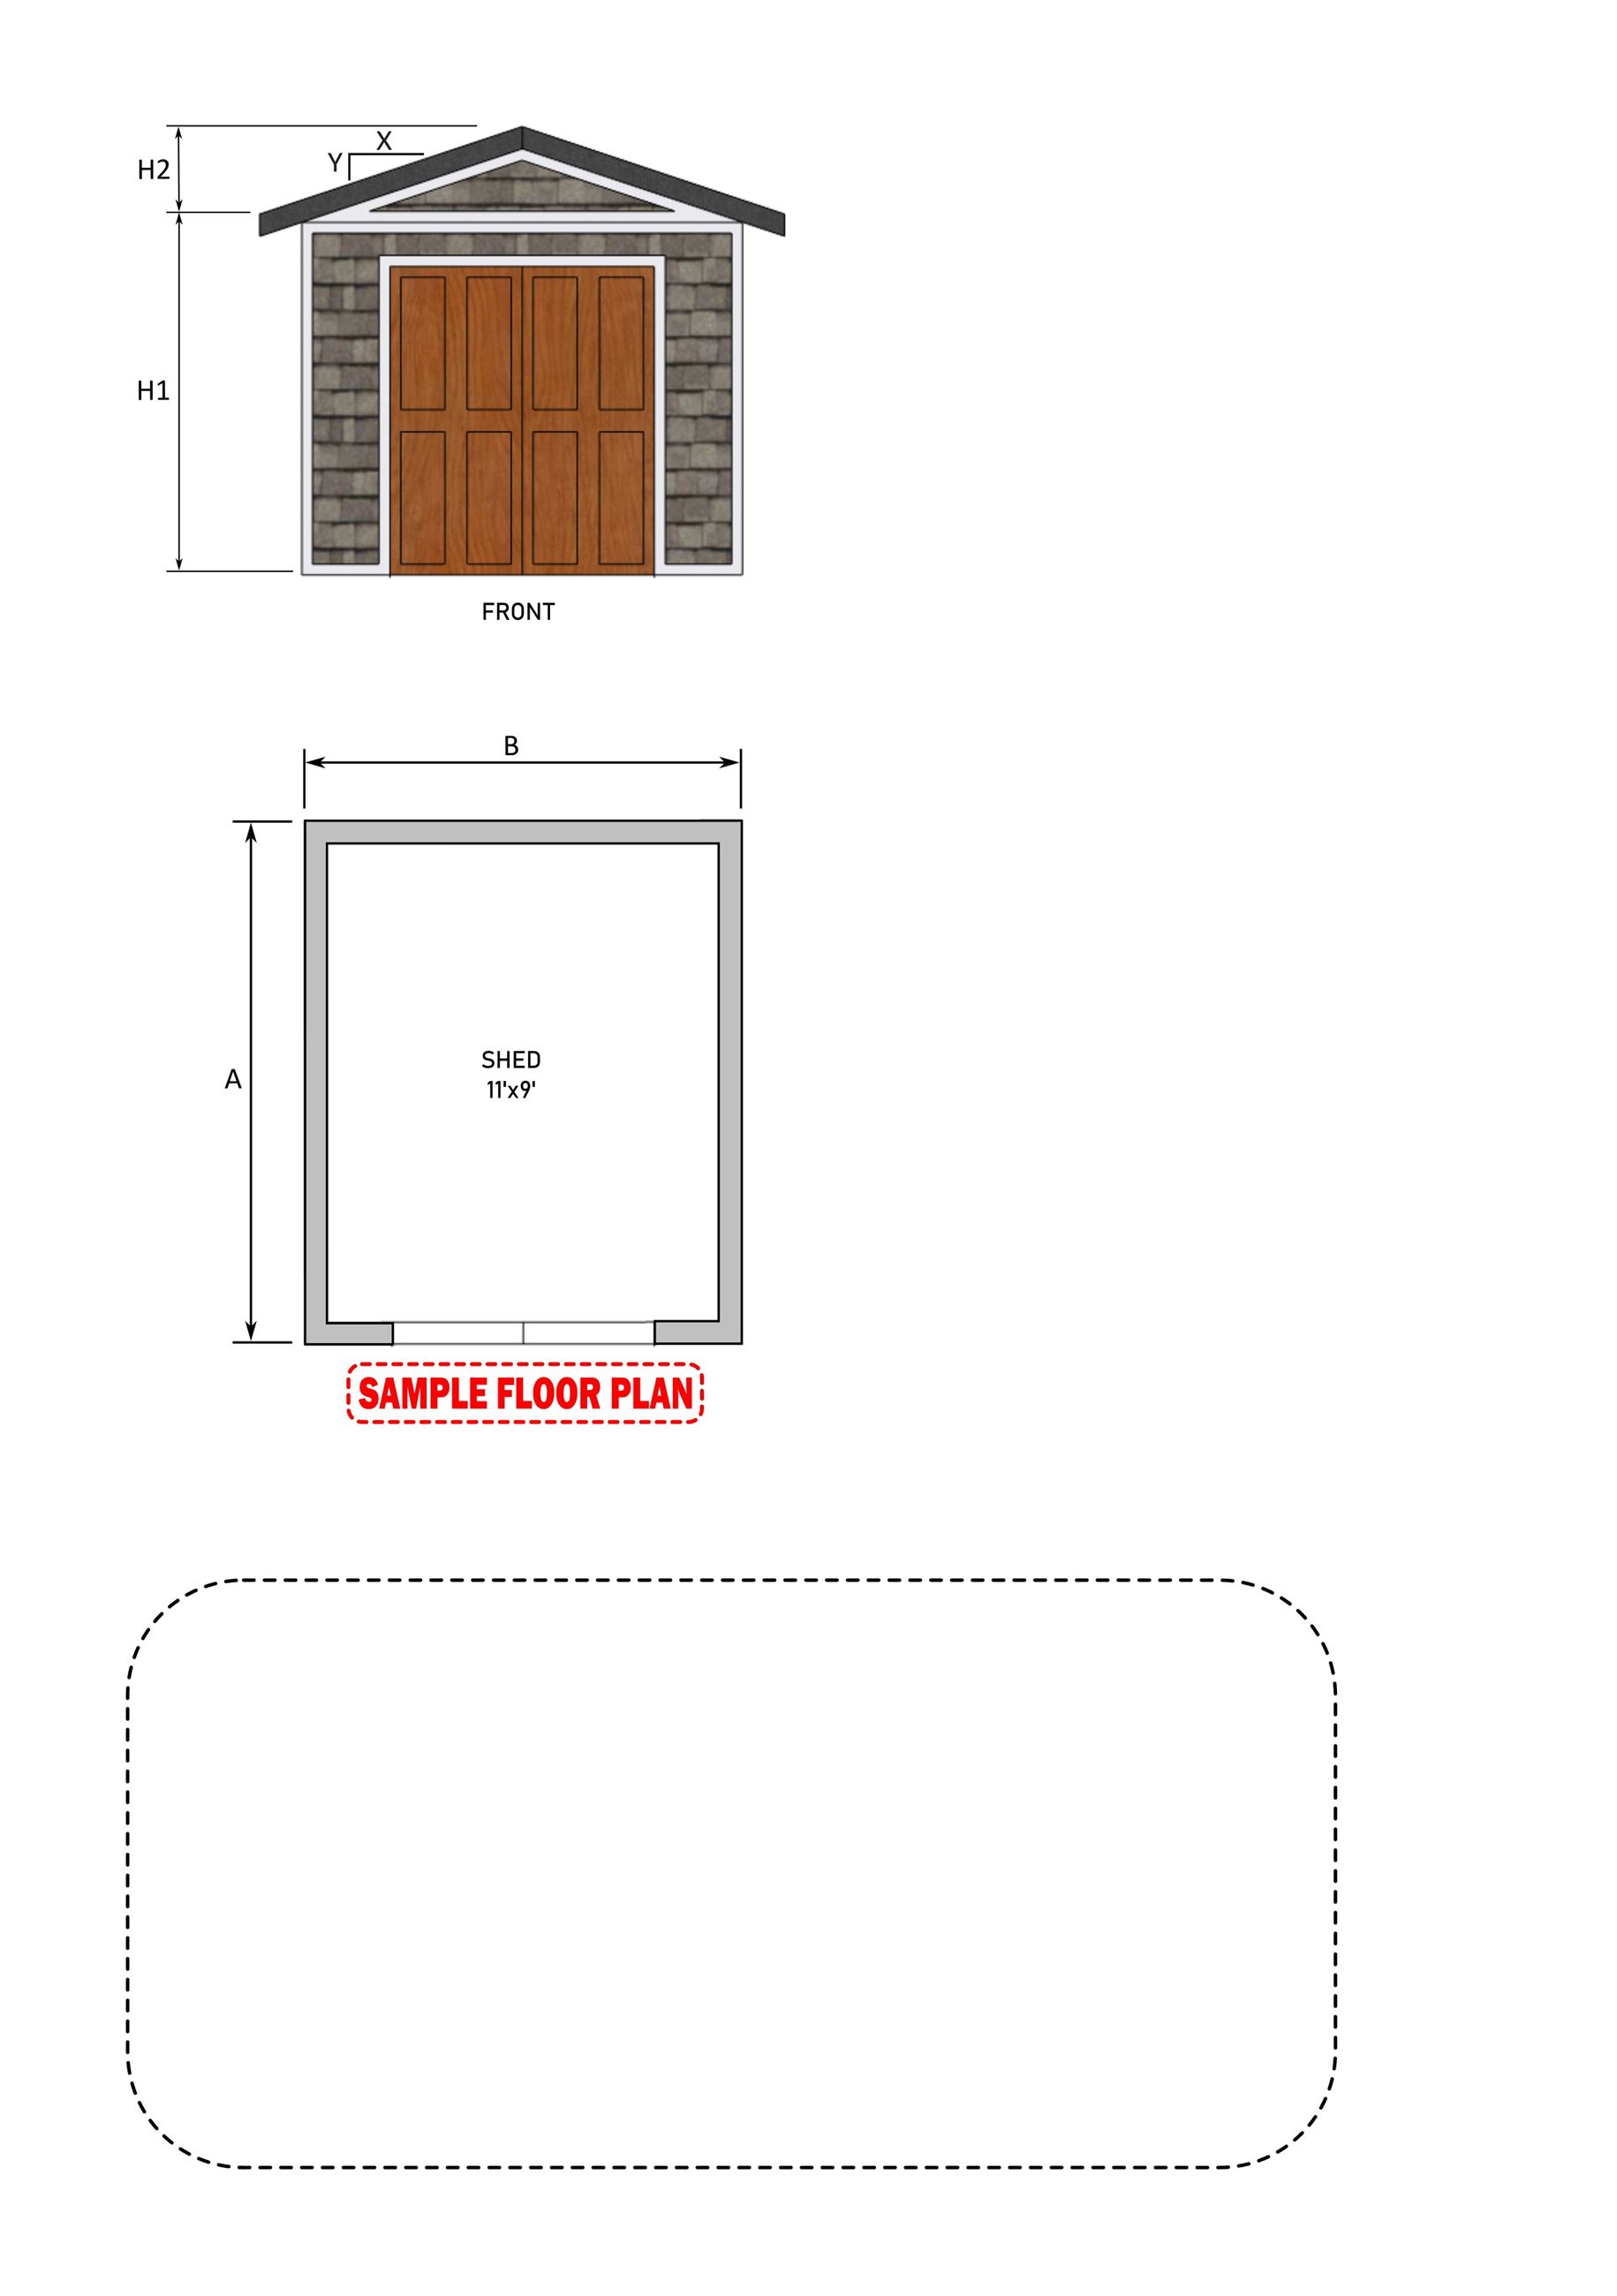 Shed Floor Plan R2 (002)